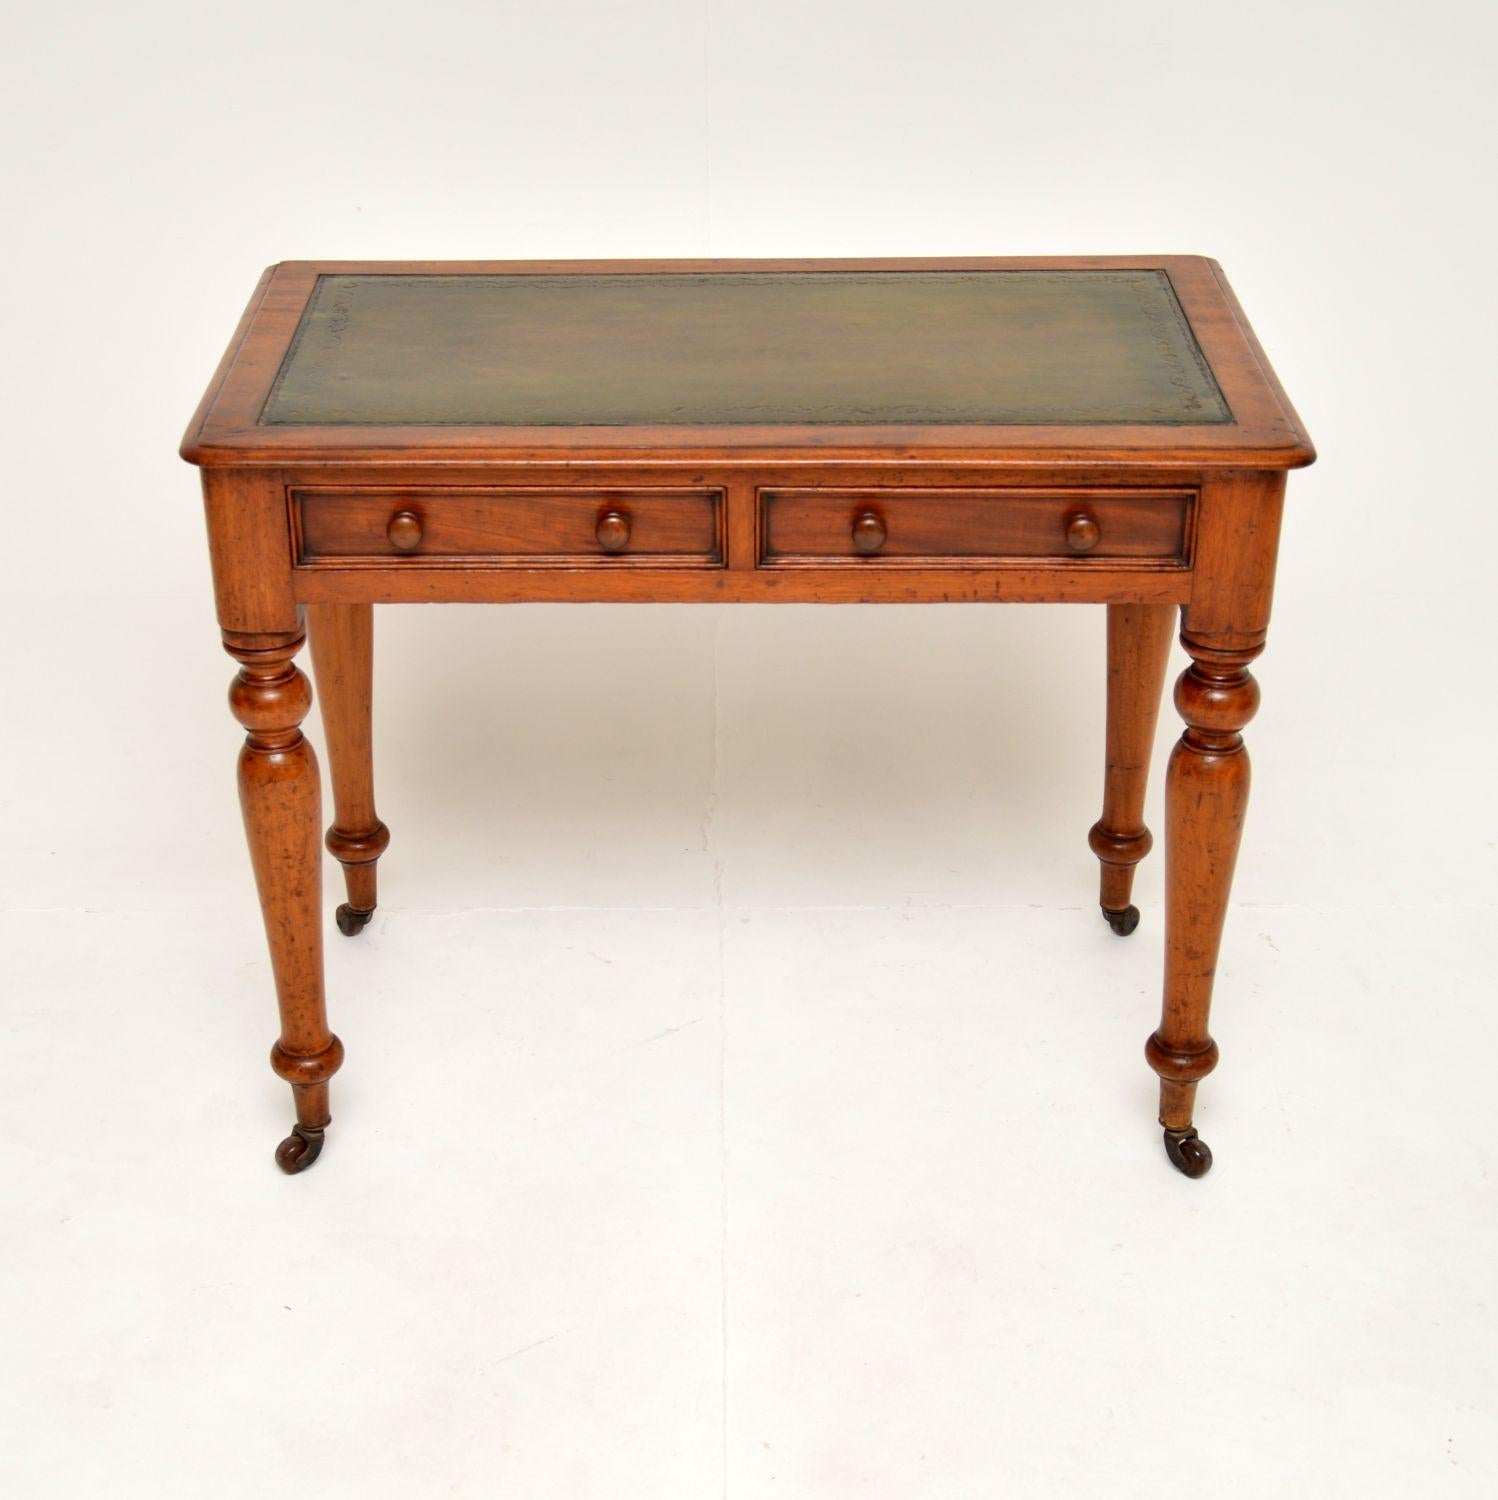 A charming and very well made antique Victorian leather top writing table / desk. This was made in England, it dates from around the 1860-1880 period.

The quality is fantastic, this is a useful and compact size. It sits on beautifully turned solid